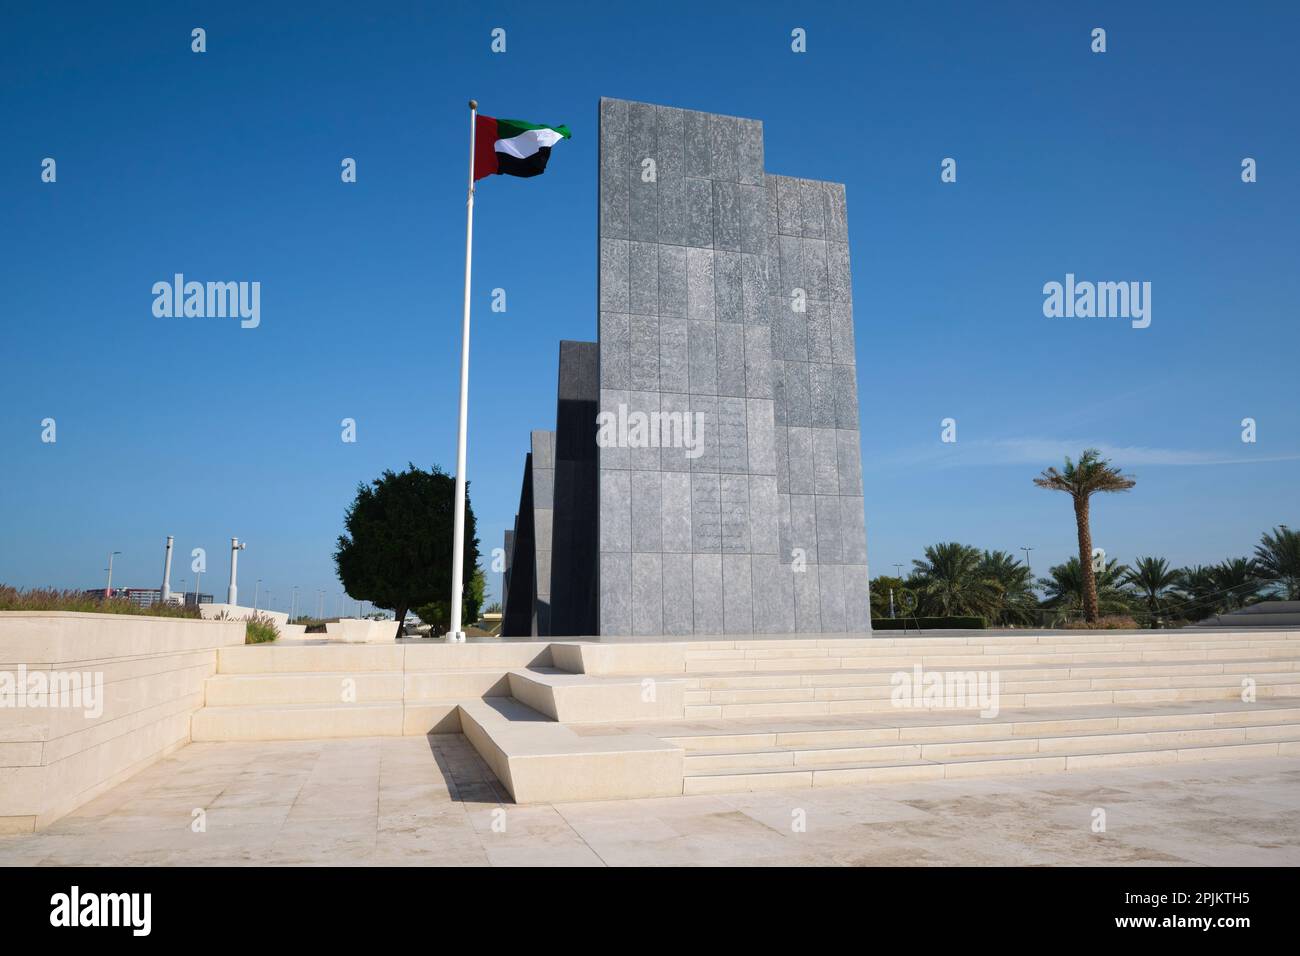 The nation's flag flying in front of the artwork. At the Wahat Al Karama memorial monument to fallen military, police, diplomats in Abu Dhabi, UAE, Un Stock Photo